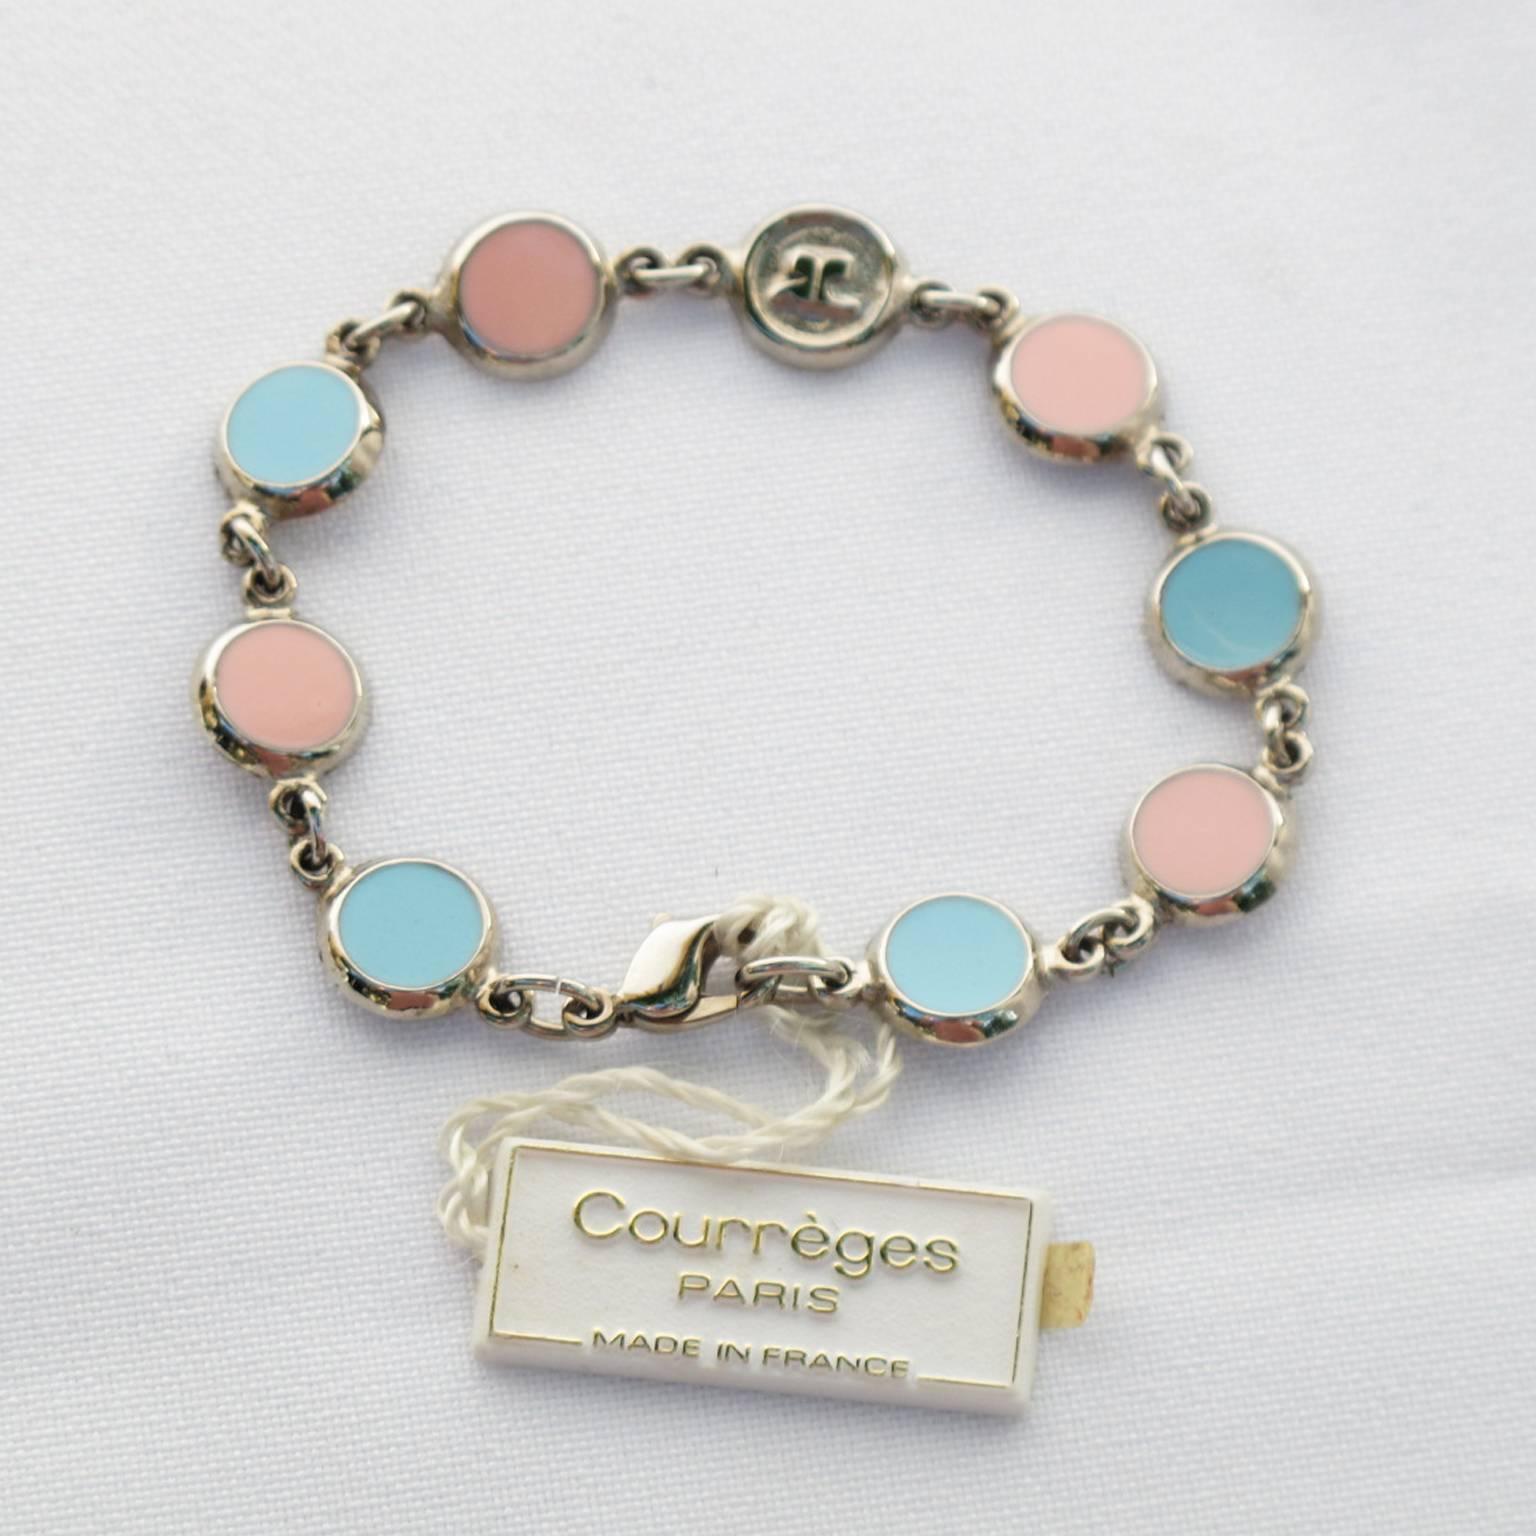 Courreges Paris signed link bracelet. Rare elegant 1970s Space Age silvered metal chain bracelet with coin shape ornate with enameling in pastel tones of pink and blue and topped with 